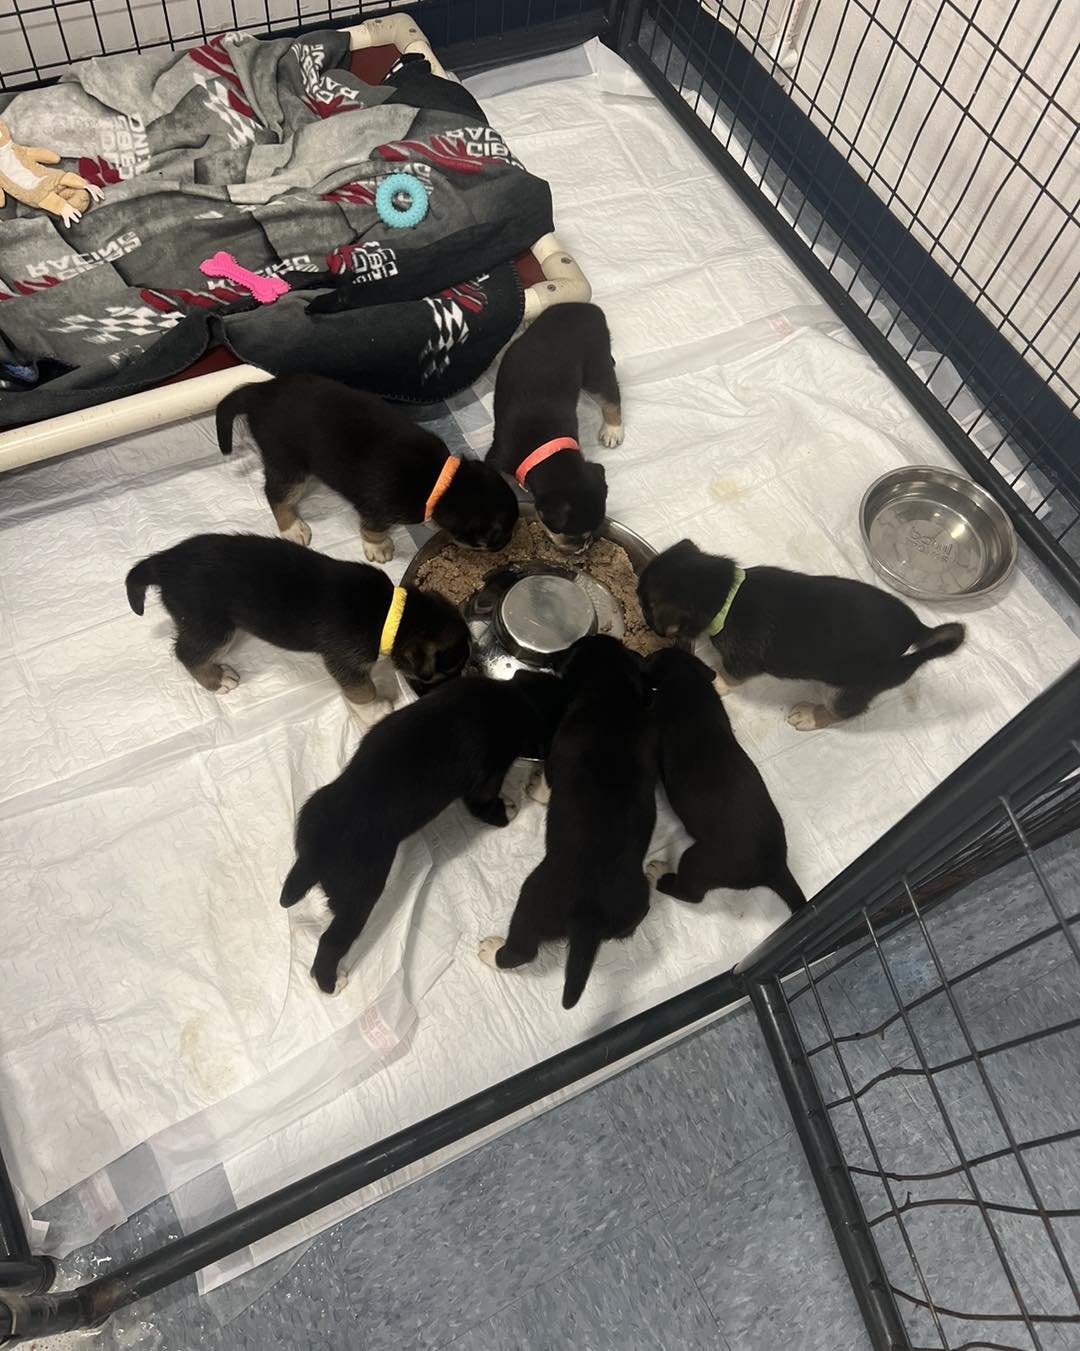 While on her feeding route, one of our street team volunteers was notified of a female nursing her litter of 9 puppies under a home. With no space to bring them in, all we could do was to provide food and work to piece together a plan. 

As the famil